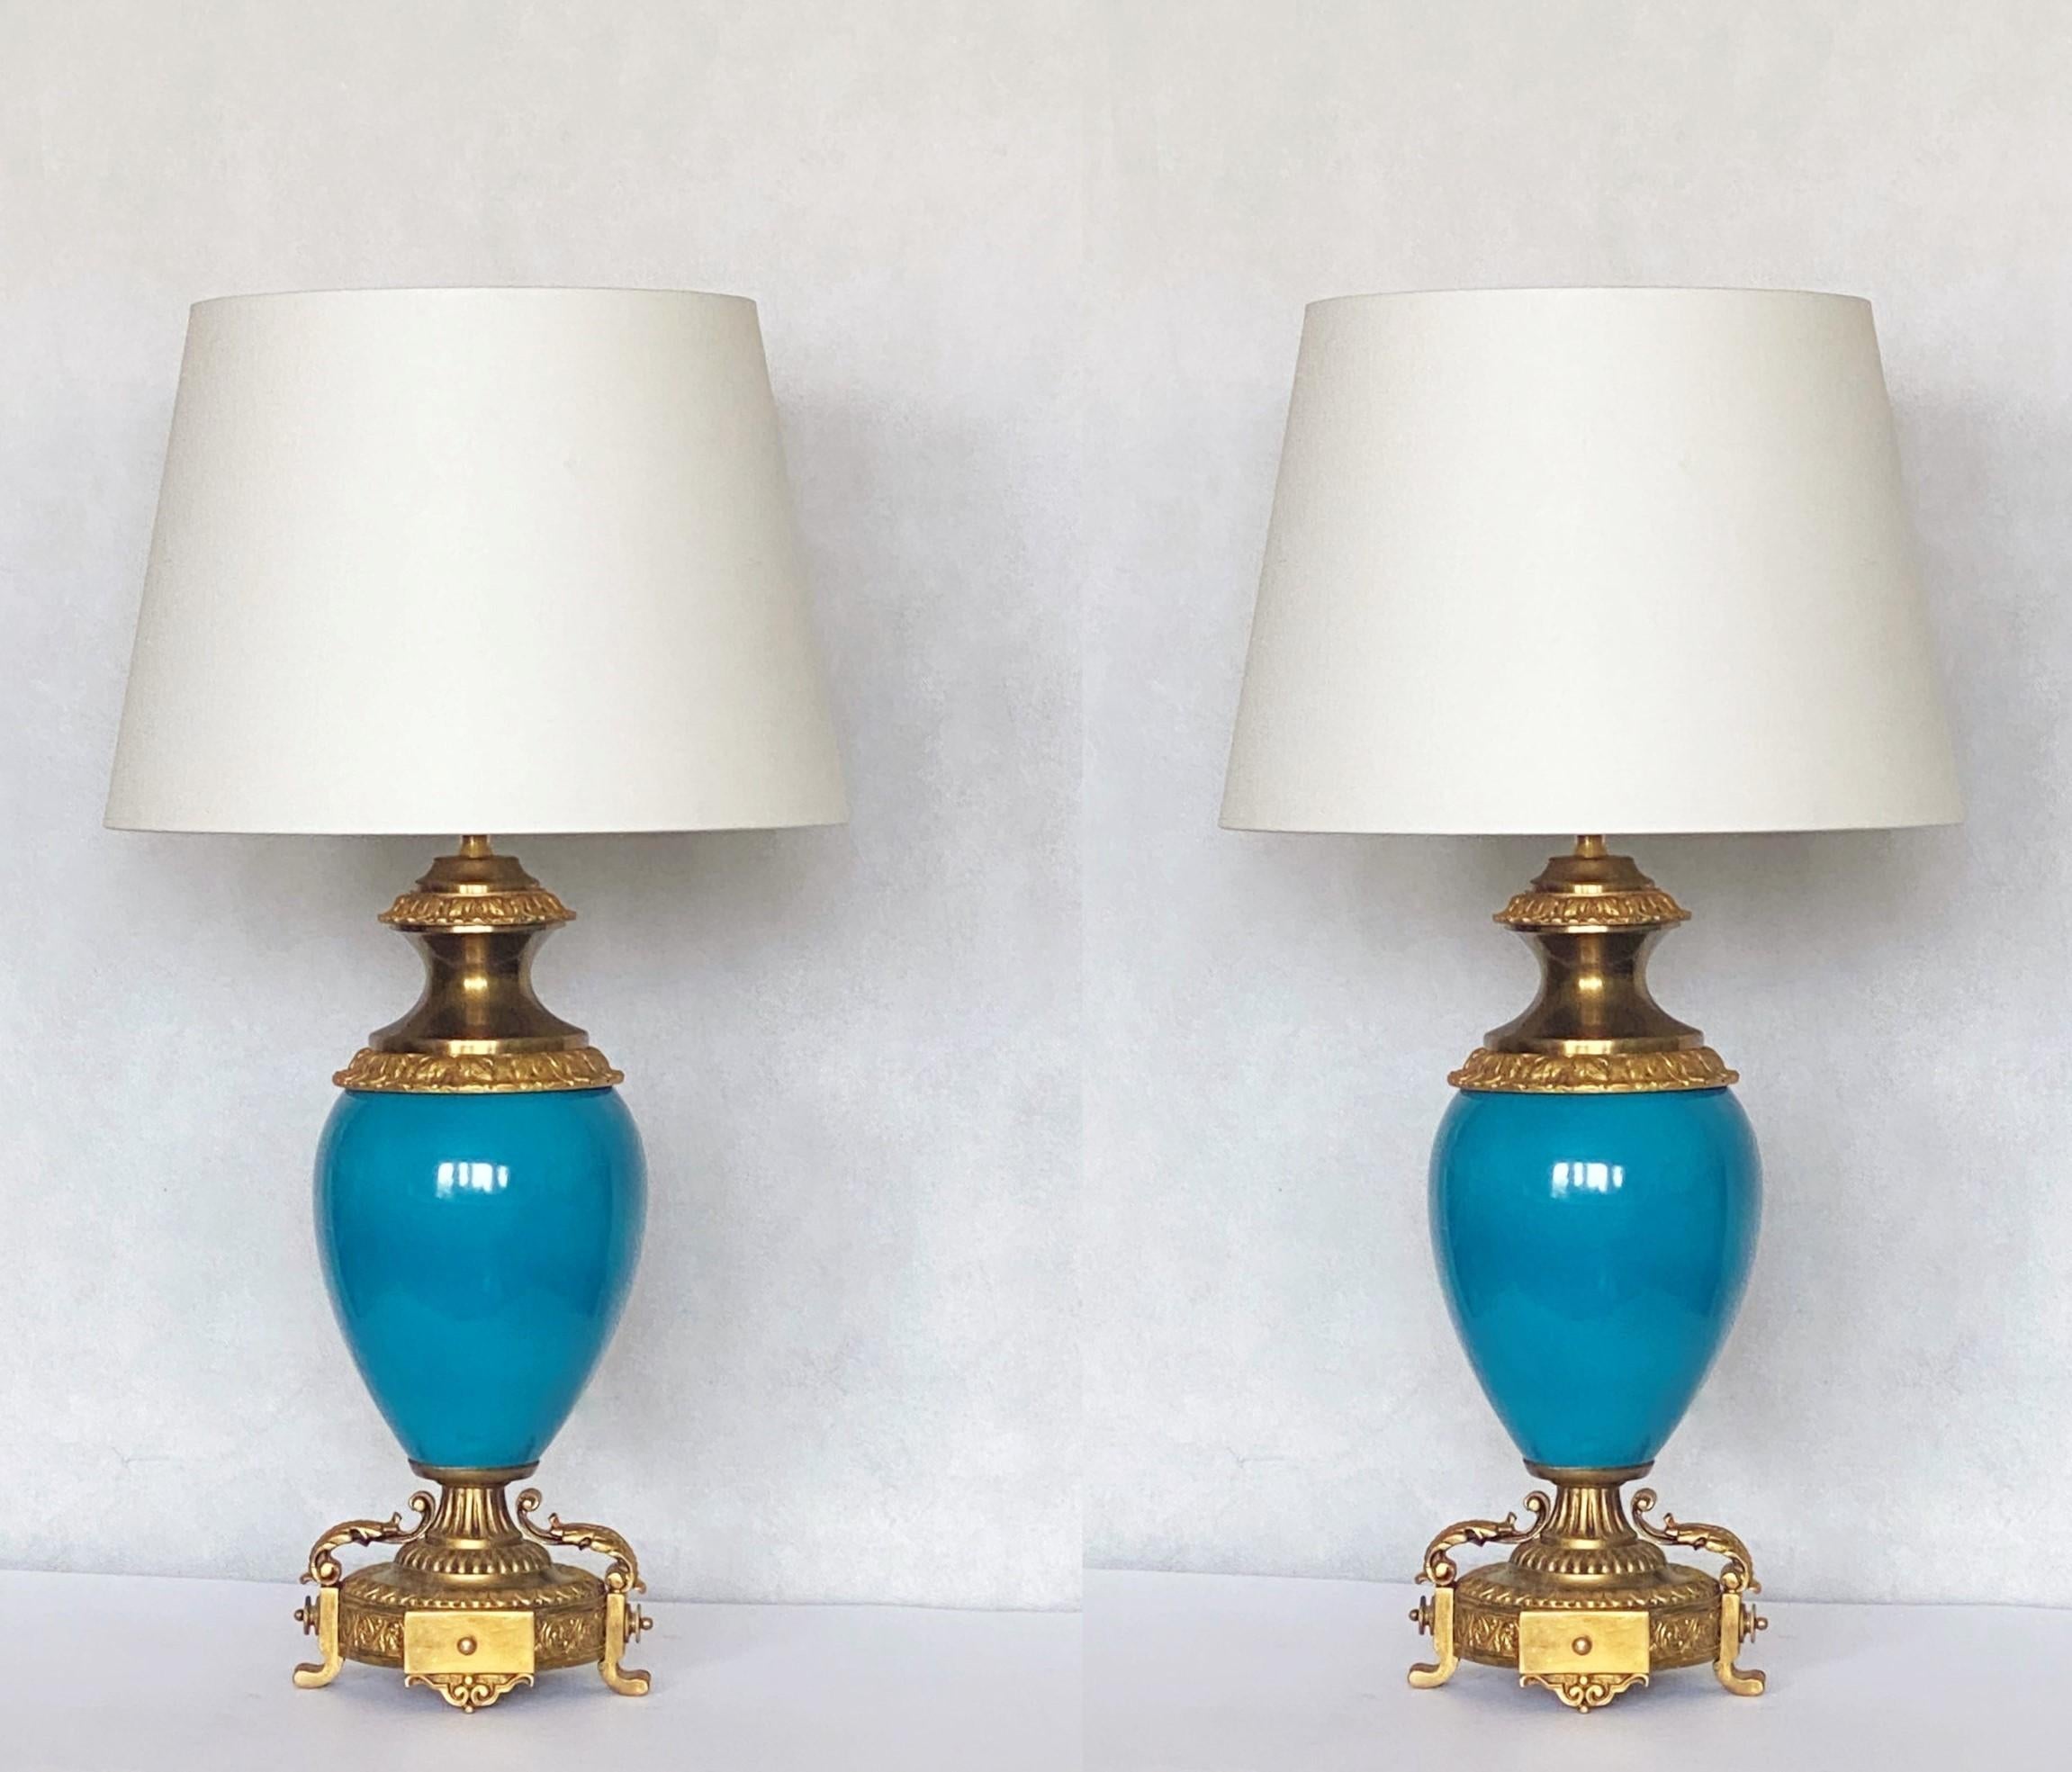 A pair of fine glazed blue porcelain gilt bronze-mounted table lamps, France, early 20th century. Porcelain vase raised on beautifully elaborate bronze base. Both porcelain vases are in very good condition, color very well preserved (images just